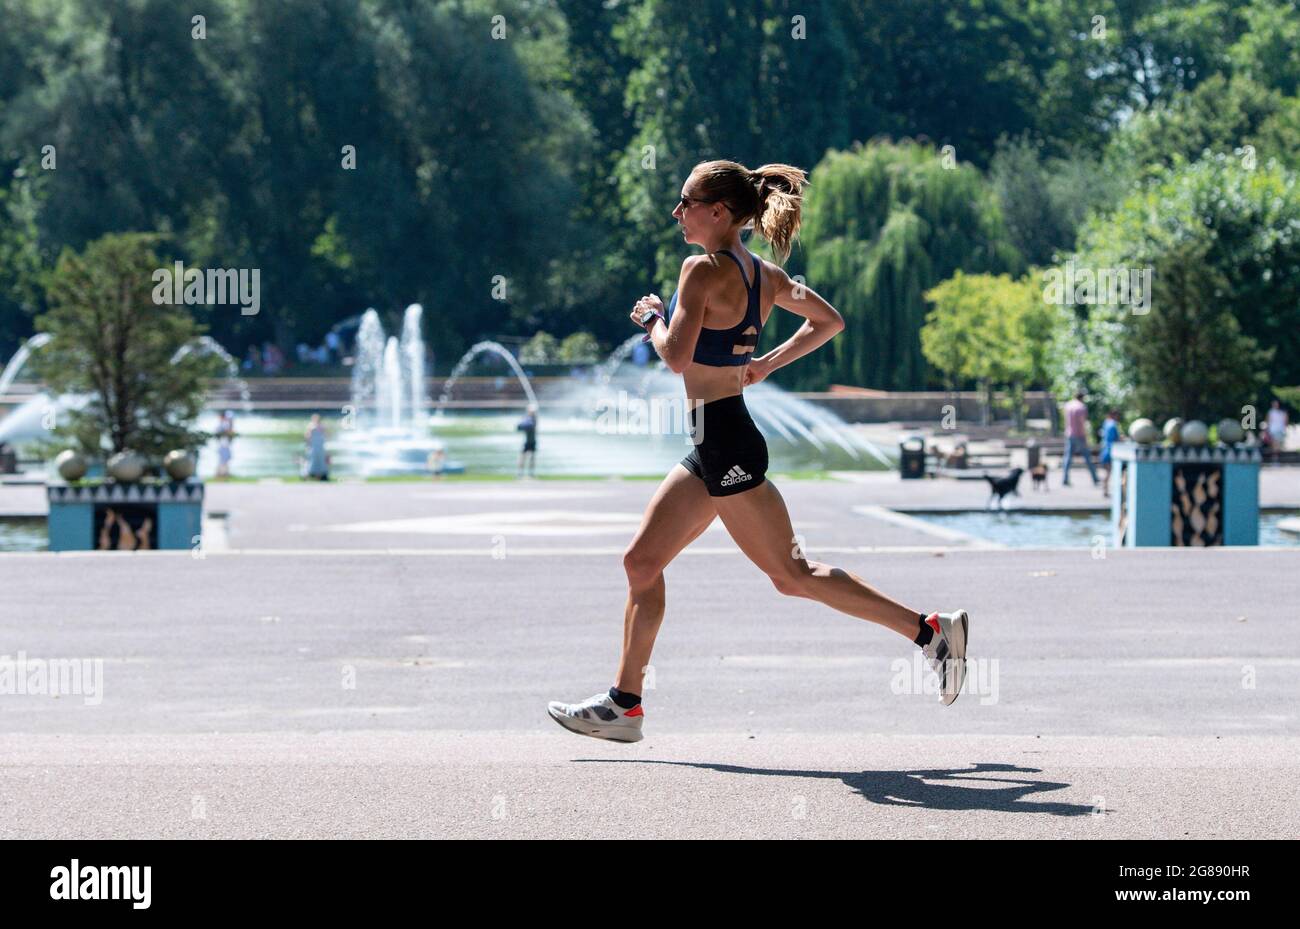 Battersea Park, United Kingdom. 18 July, 2021. Stephanie Davis Team GB Olympic Marathon runner trains in the sweltering heat at Battersea Park in preparation for the heat at the 2020 Tokyo Olympic Games. Credit: Nigel Bramley/Alamy Live News Stock Photo